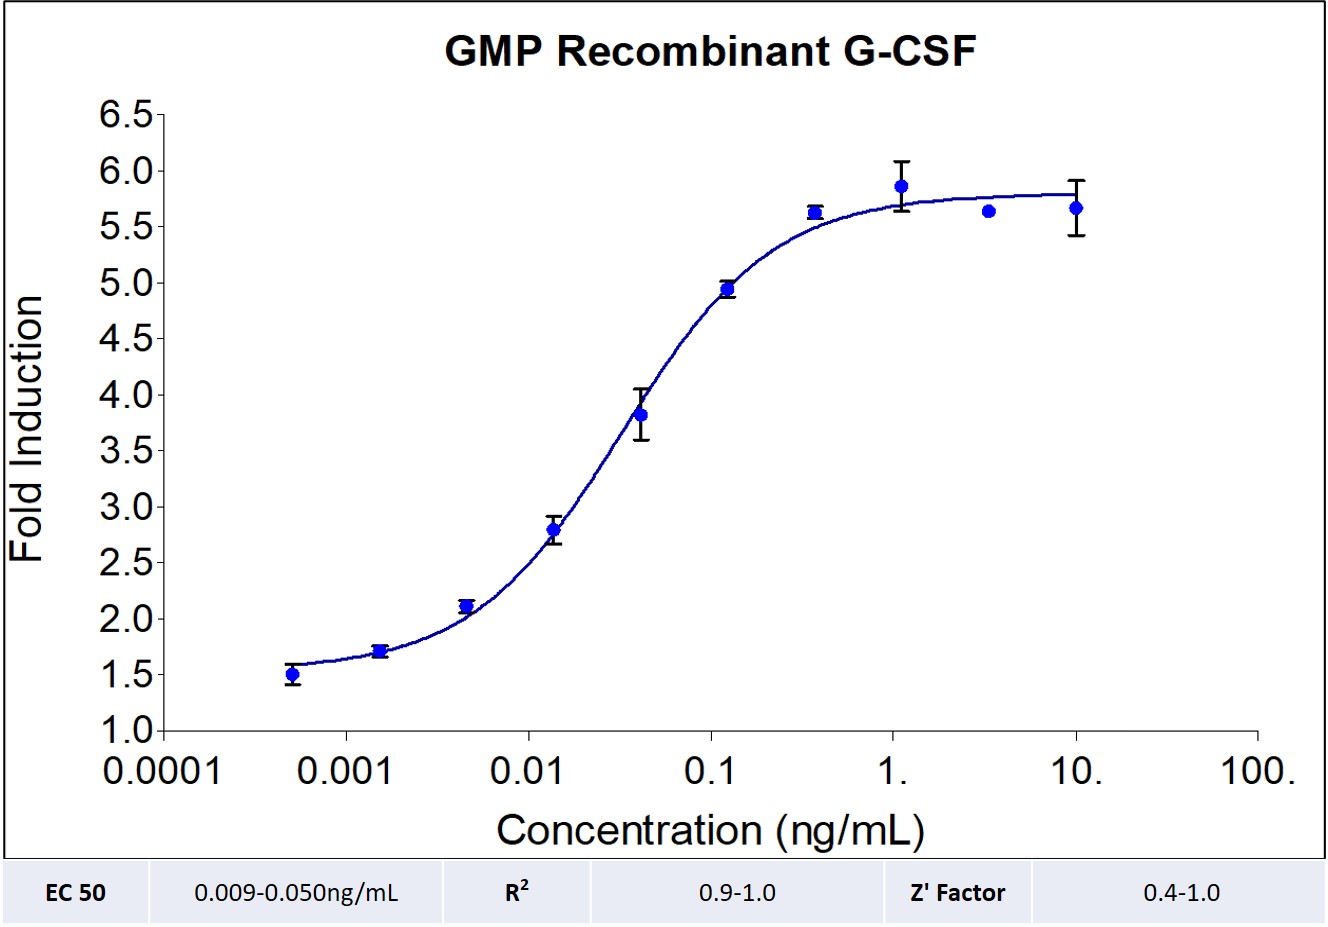 GMP-grade recombinant human G-CSF (HZ-1207-GMP) Stimulates dose-dependent proliferation of the M-NFS-60 Mouse Myeloid Leukemia indicator cells line. Viable cell number was quantitatively assessed by PrestoBlue Cell Viability Reagent. M-NFS-60 cells were treated with increasing concentrations of recombinant human G-CSF for 72 hours. The EC50 was determined using a 4- parameter non-linear regression model. Activity determination was conducted in triplicate on a validated bioassay. The EC50 values range from 0.009-0.05 ng/mL.  